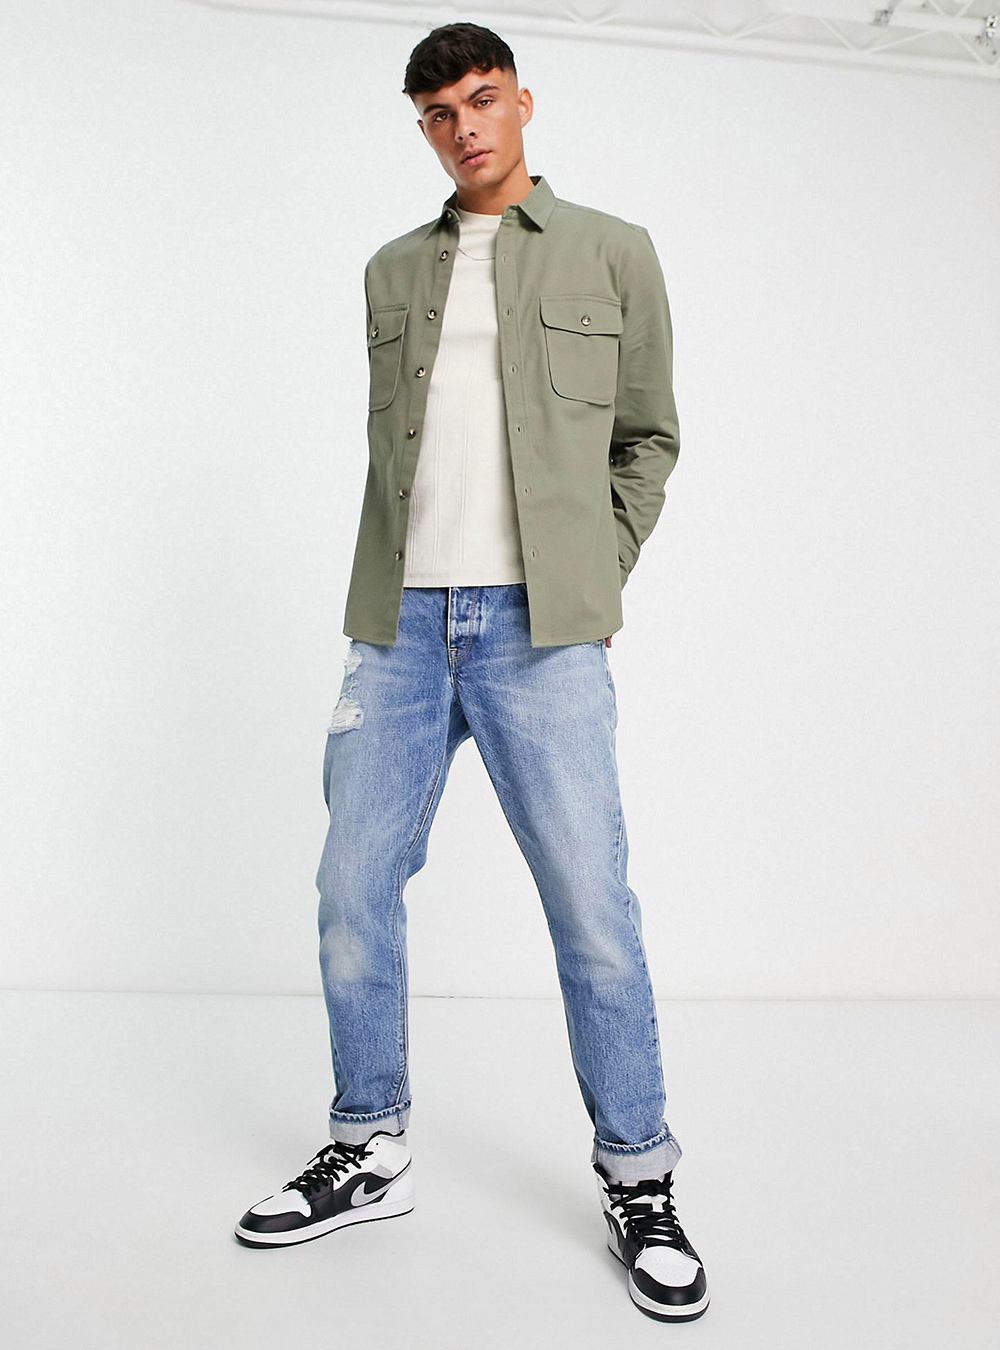 green shirt jacket, white t-shirt, blue jeans, and sneakers